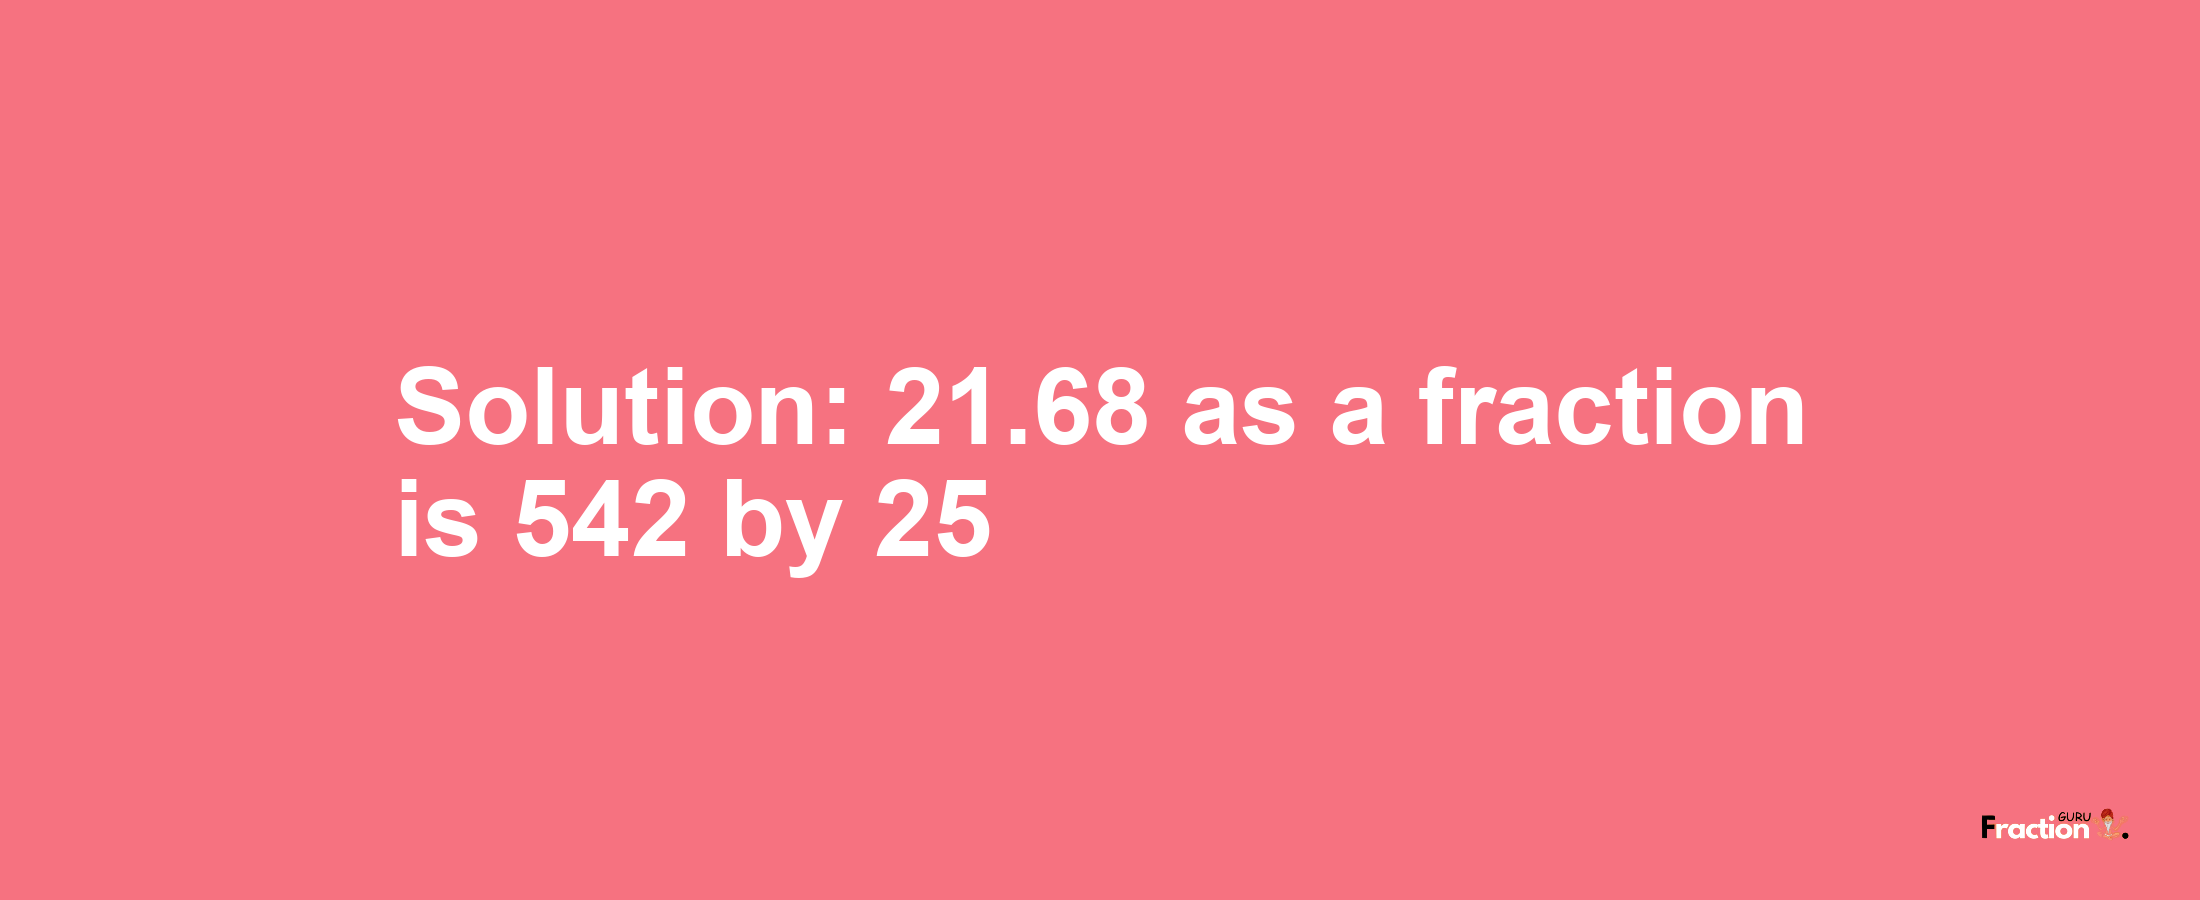 Solution:21.68 as a fraction is 542/25